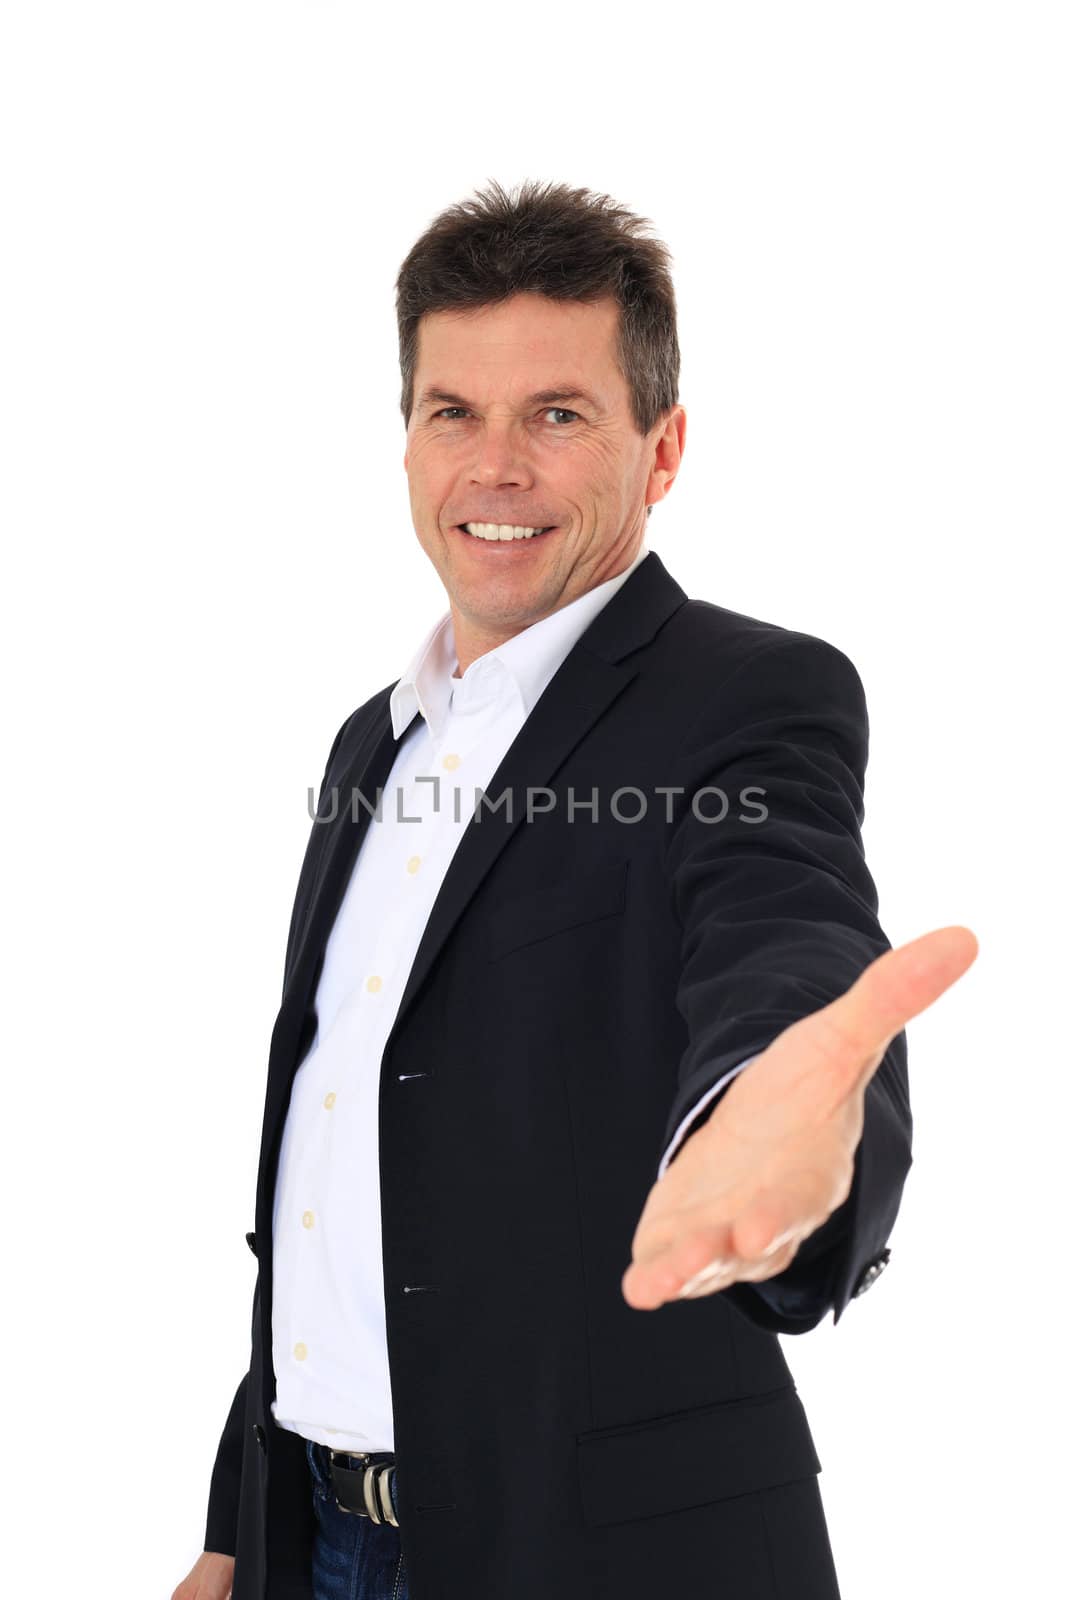 Attractive middle-aged man giving a helping hand. All on white background.